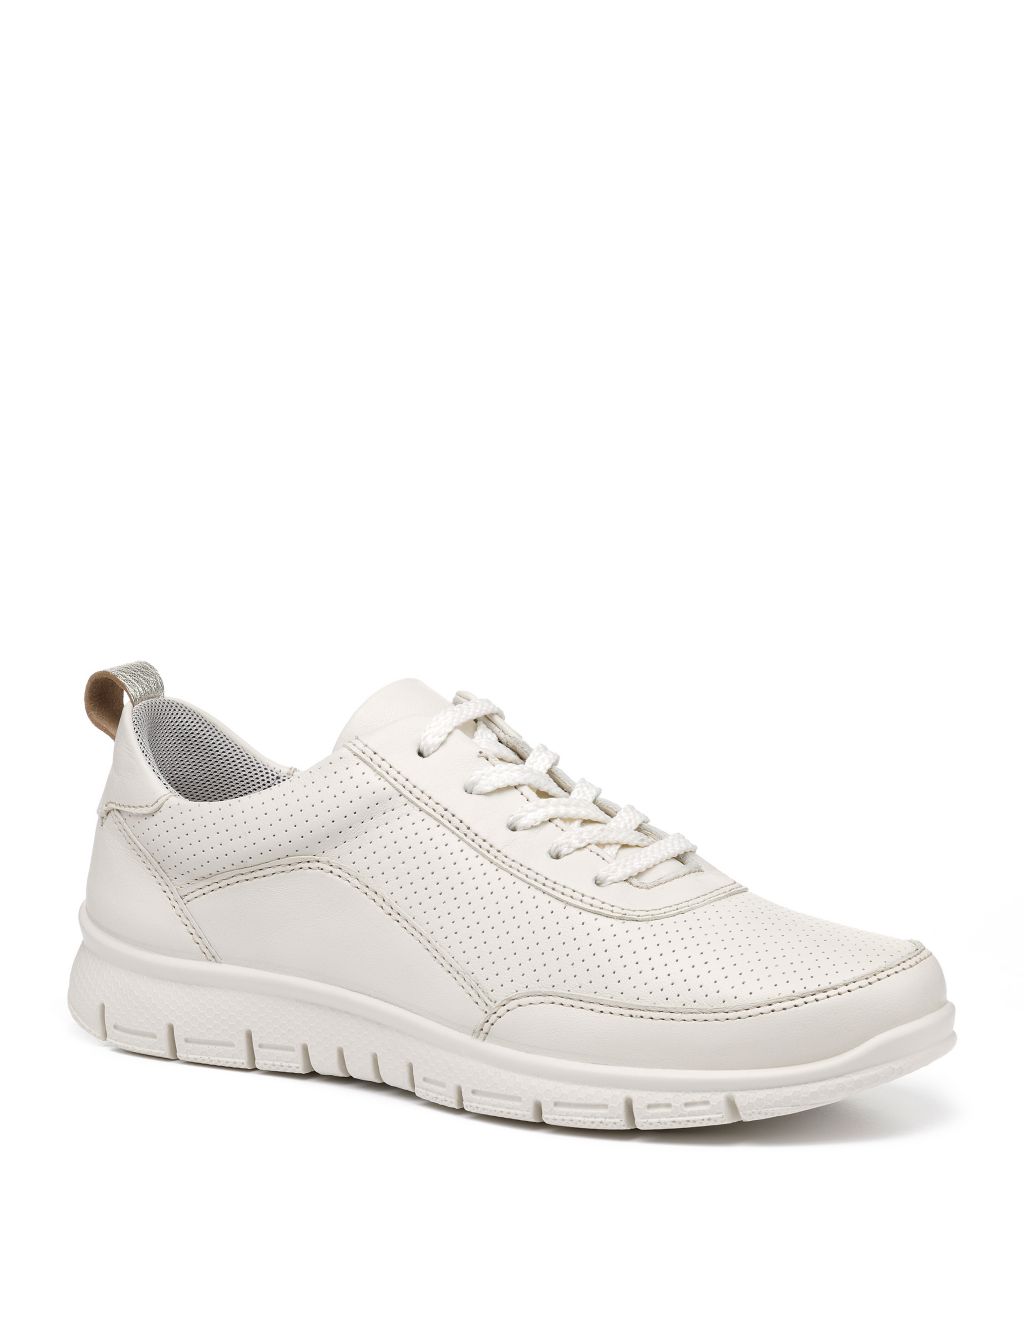 Gravity II Suede Lace Up Trainers | Hotter | M&S